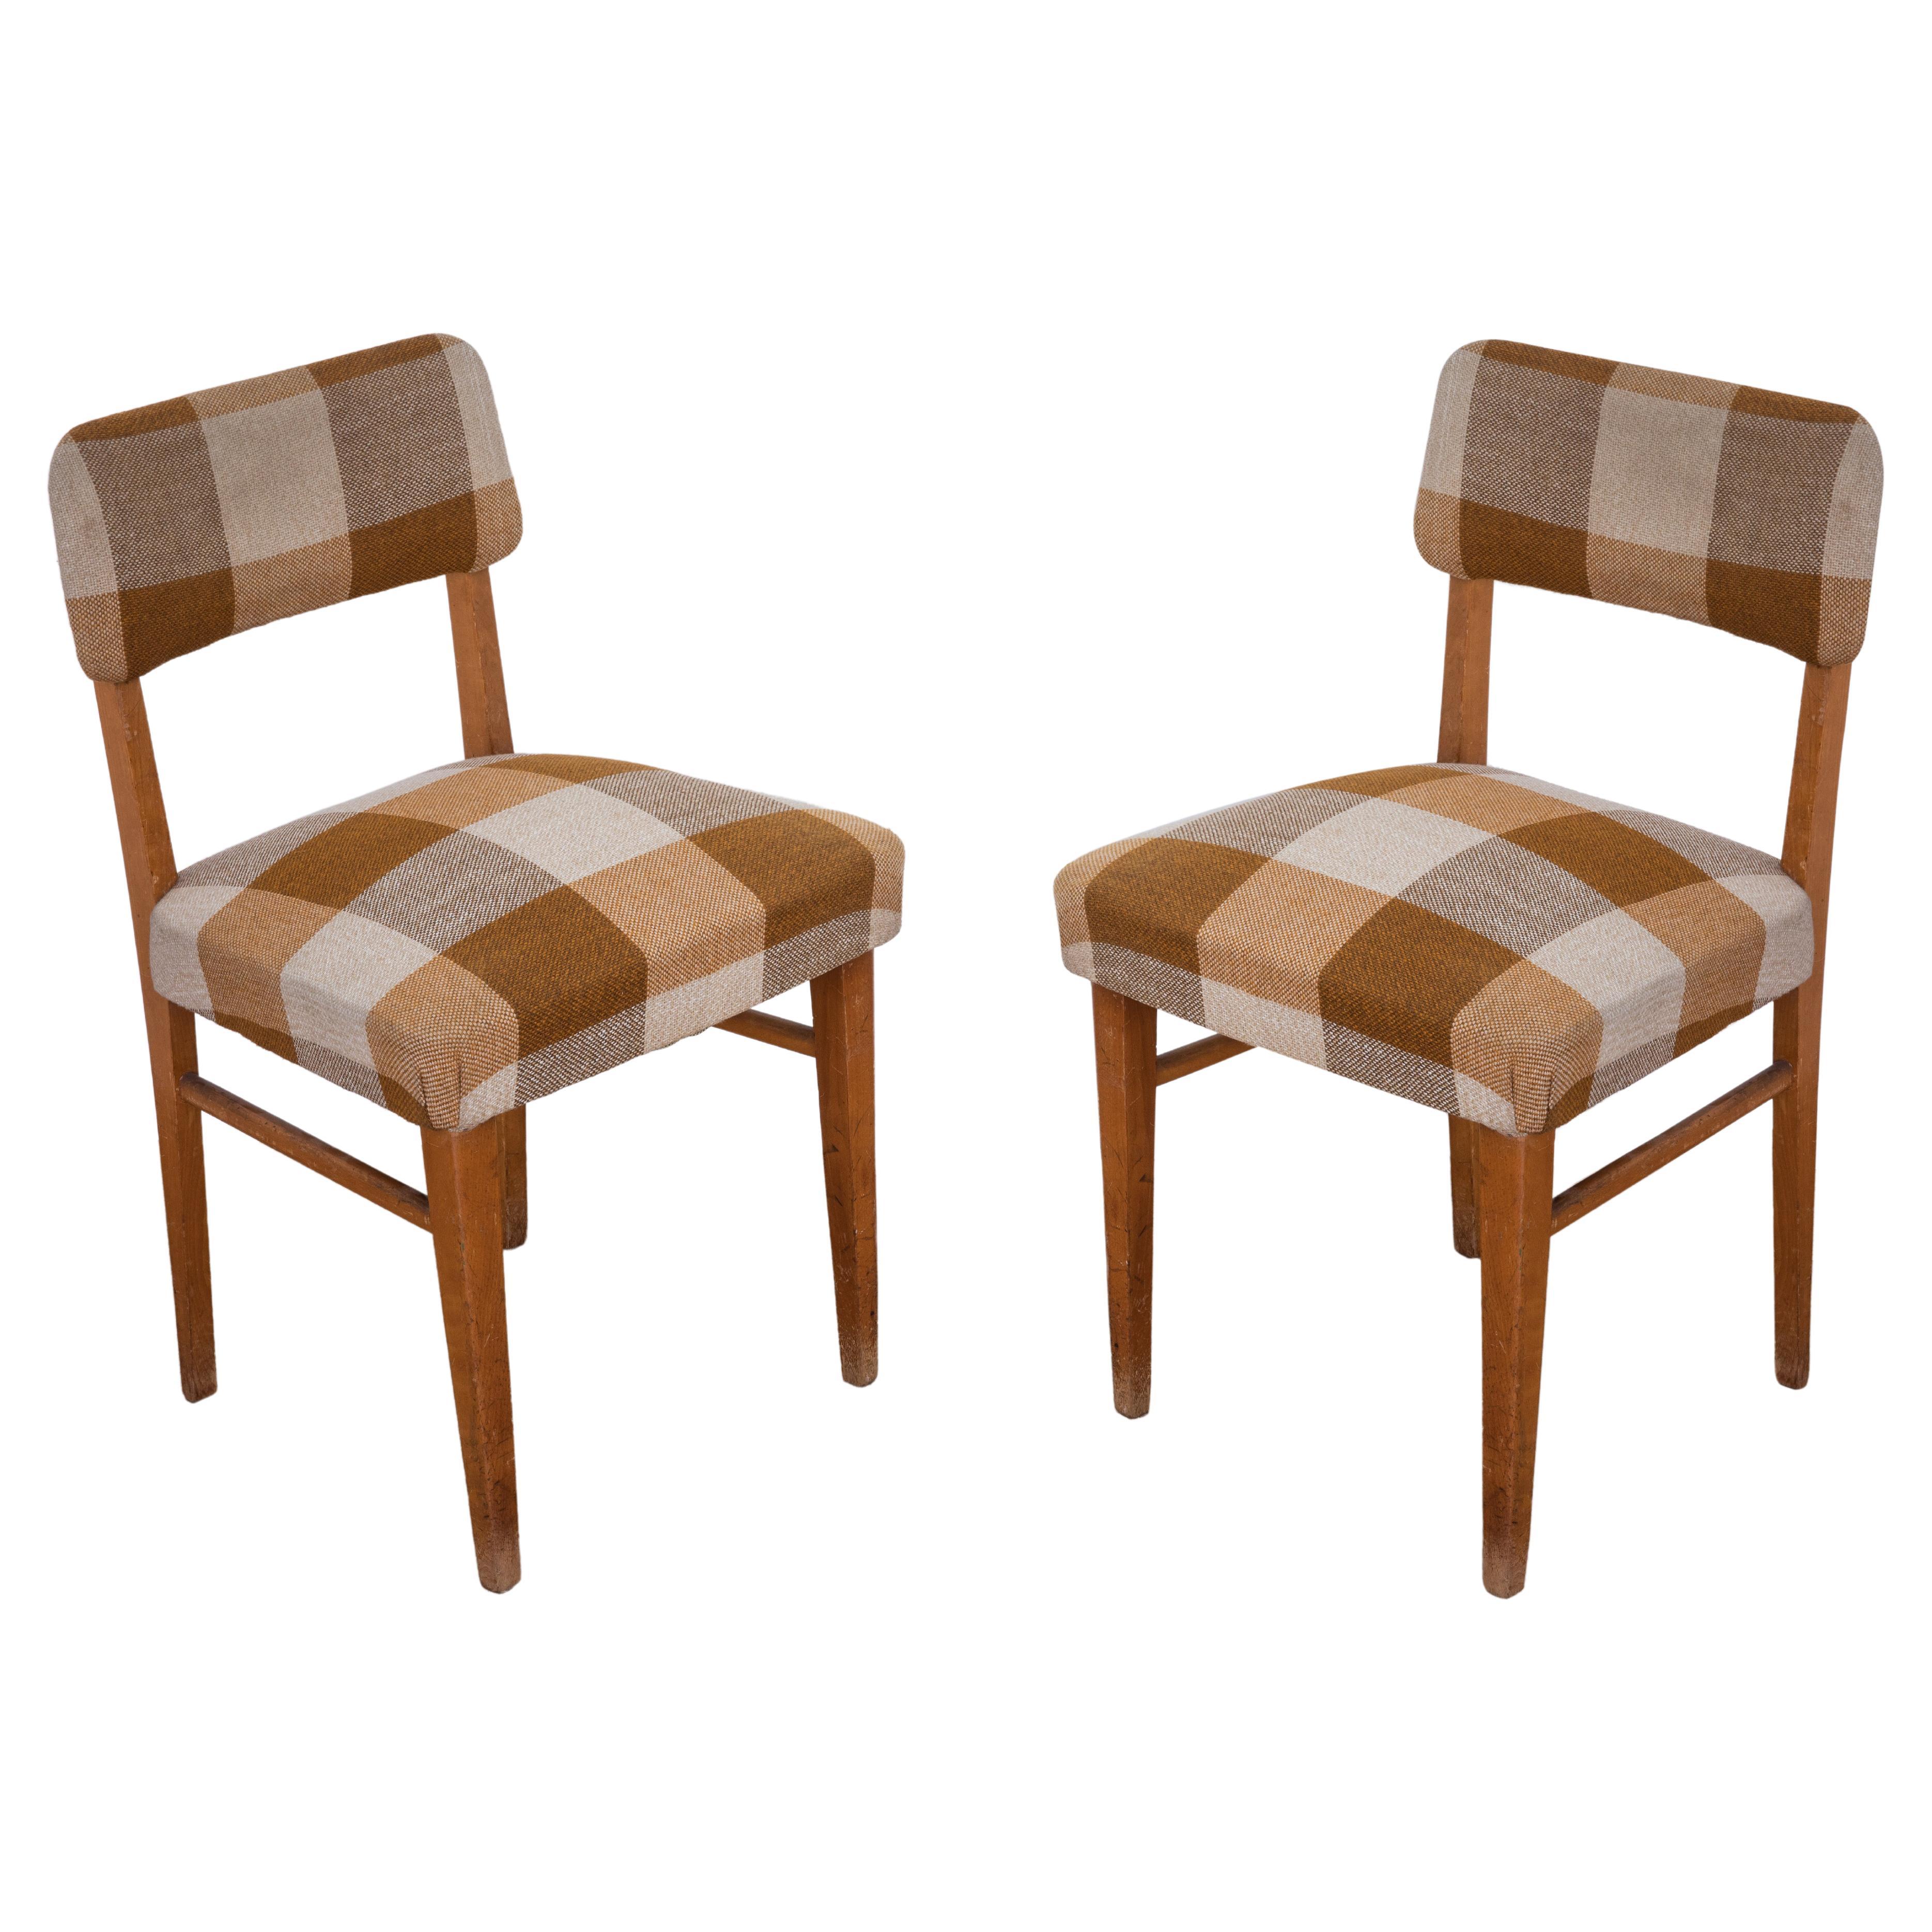 Pair of Original 1950s Chairs Wooden Structure and Seat Covered in Fabric